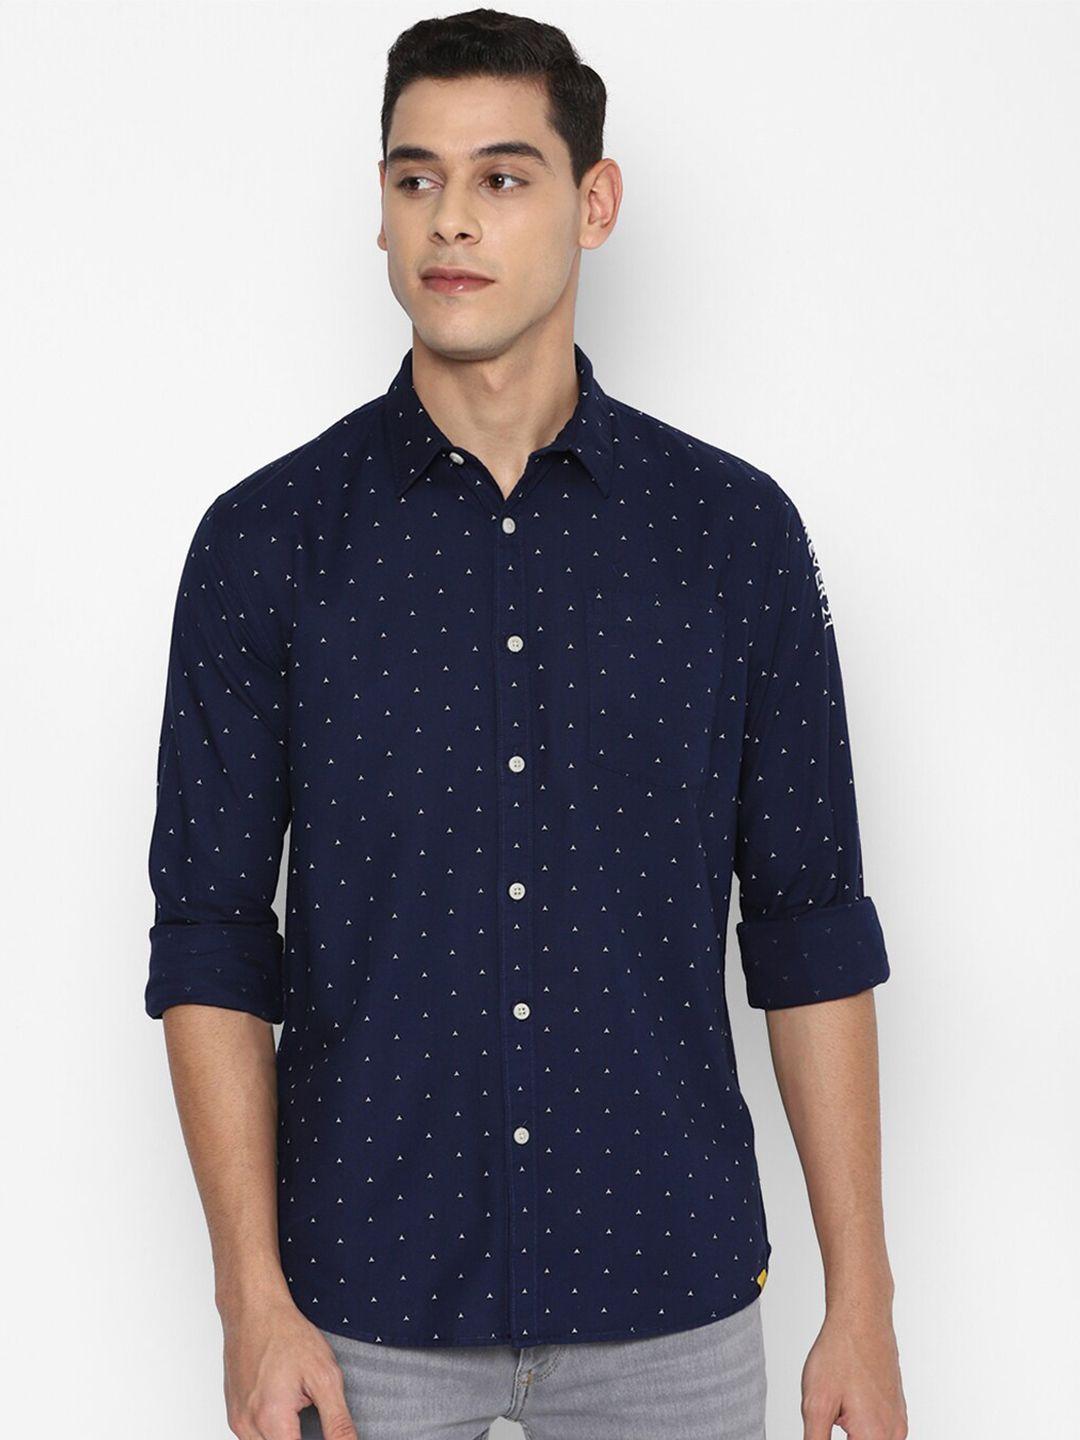 forever-21-men-blue-slim-fit-pure-cotton-printed-casual-shirt